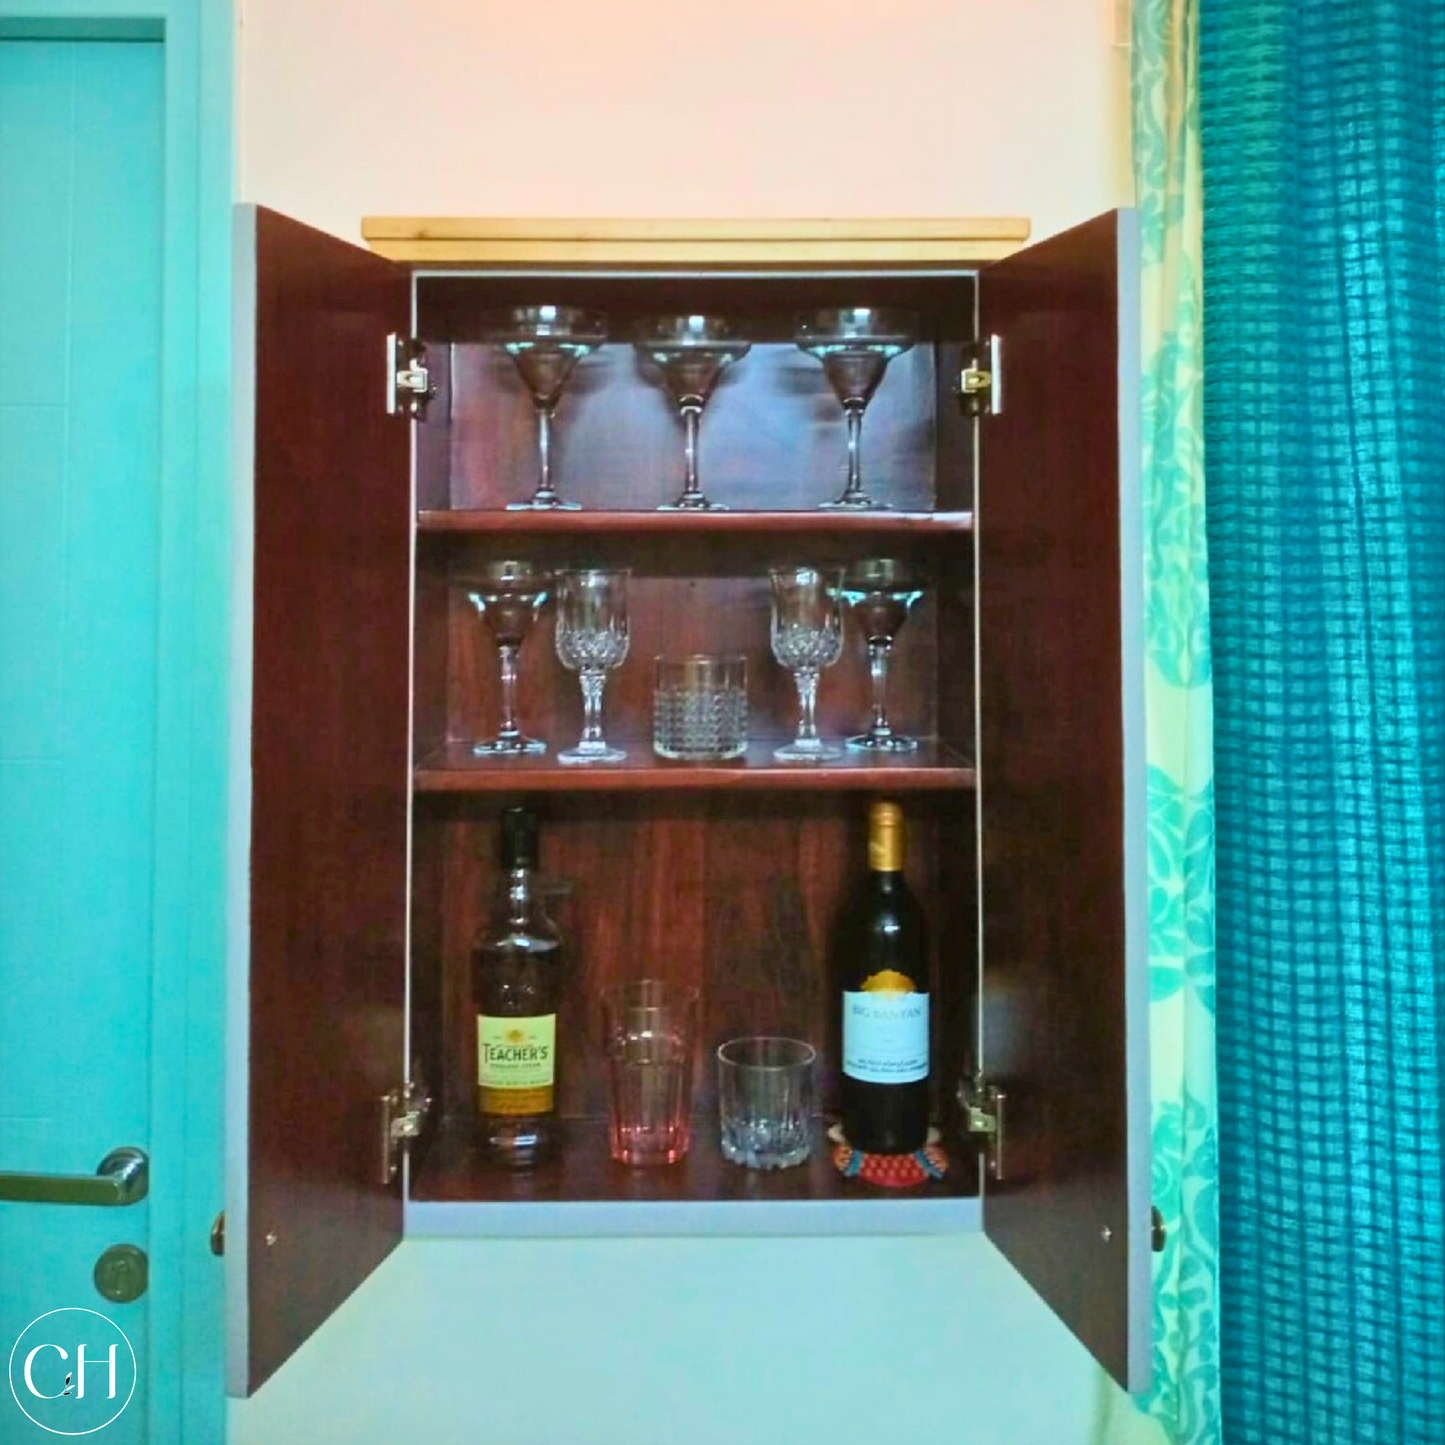 CustHum - Open wall-mounted bar cabinet showing glassware and bottles 